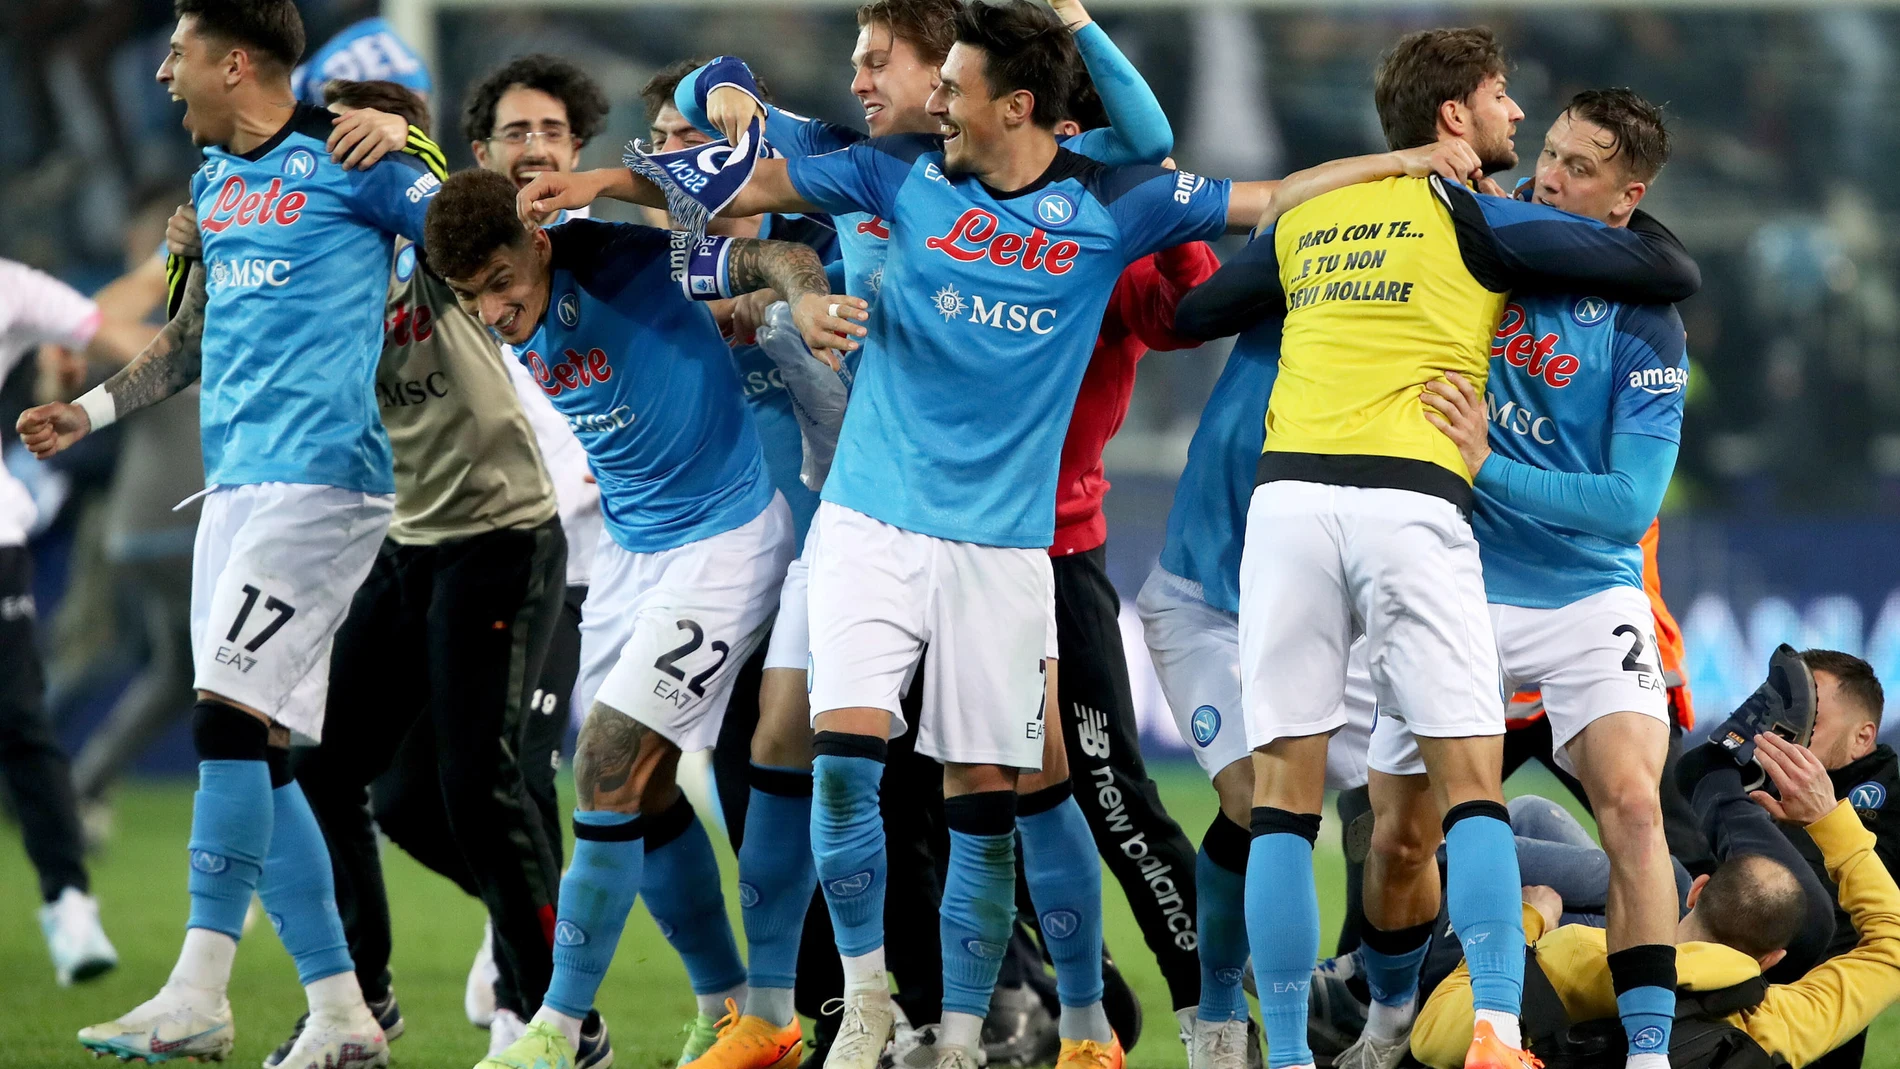 Udine (Italy), 04/05/2023.- SSC Napoli player scelebrate following the Italian Serie A soccer match Udinese Calcio vs SSC Napoli at the Friuli - Dacia Arena stadium in Udine, Italy, 04 May 2023. Napoli sealed their third-ever Serie A championship after a 1-1 draw at Udinese. (Italia) EFE/EPA/GABRIELE MENIS
